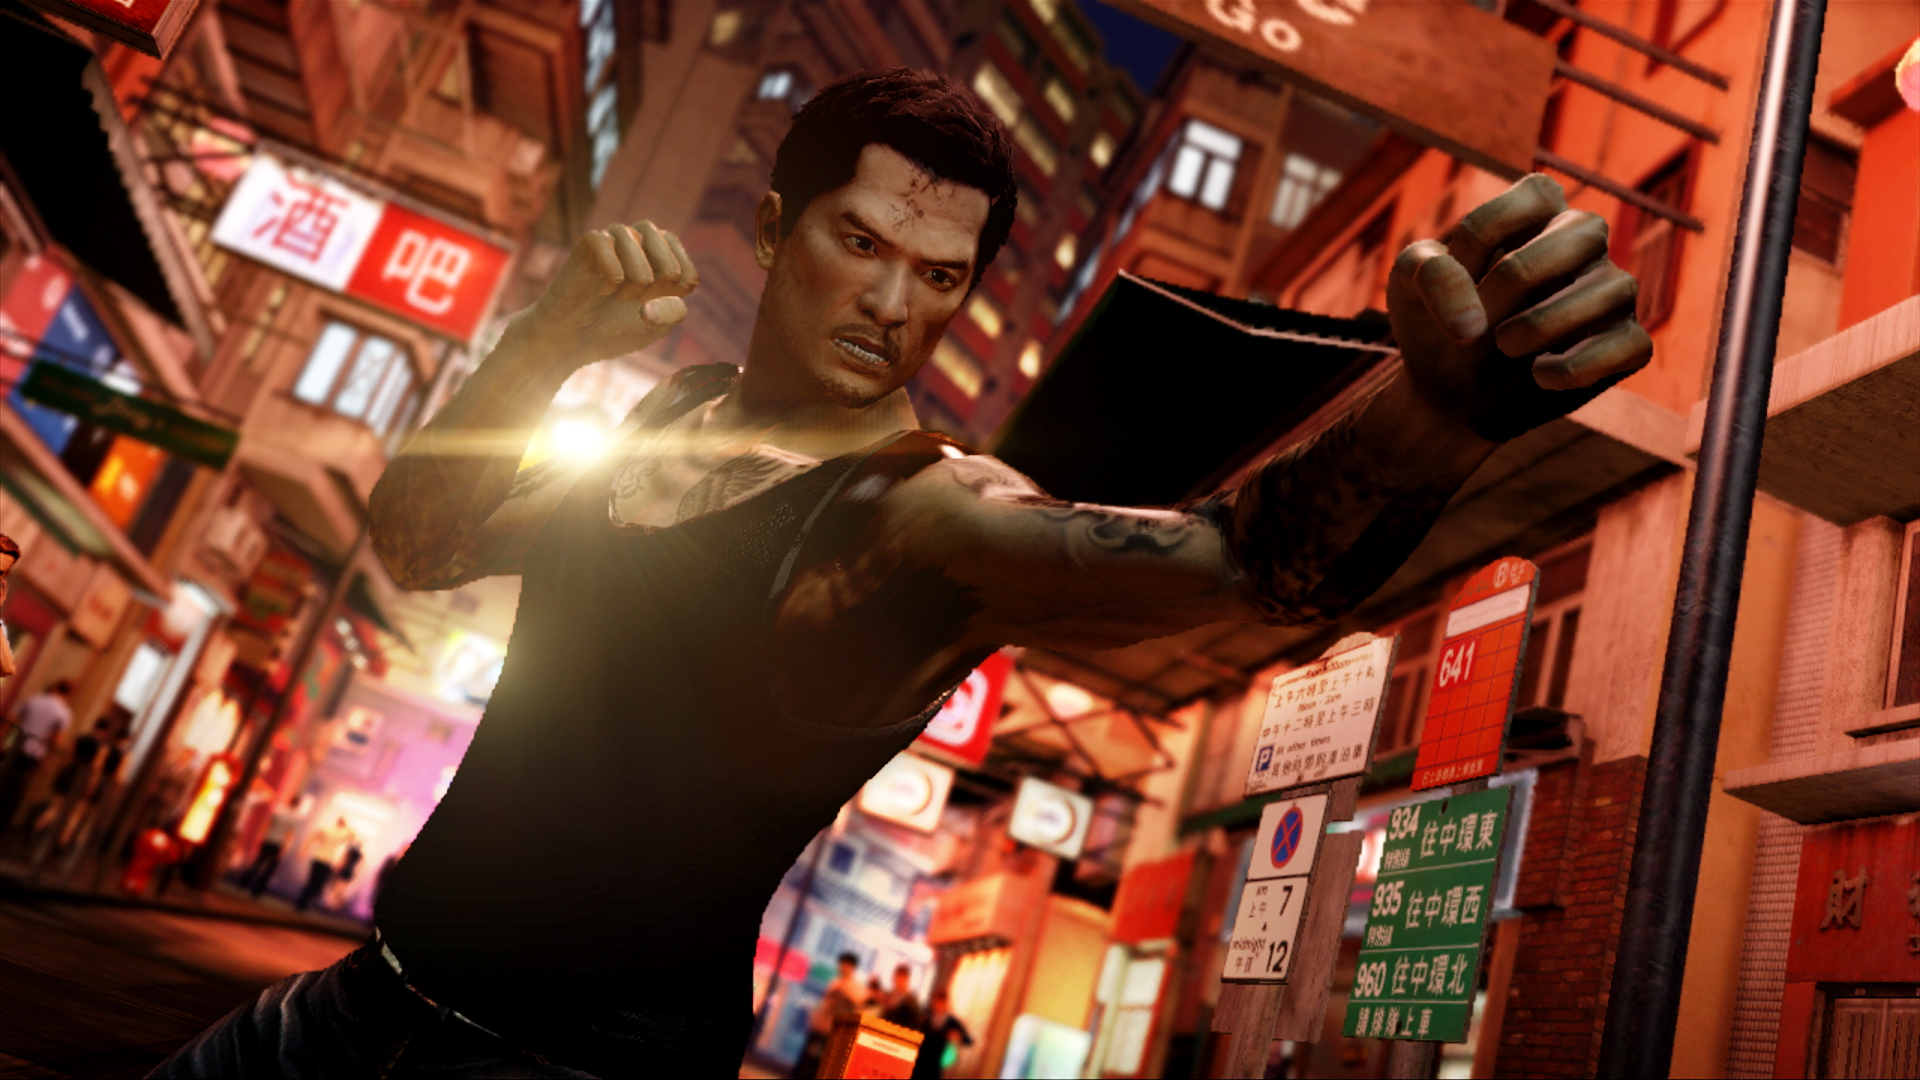 Sleeping Dogs 'Nightmare in North Point' DLC adds zombies - Neoseeker